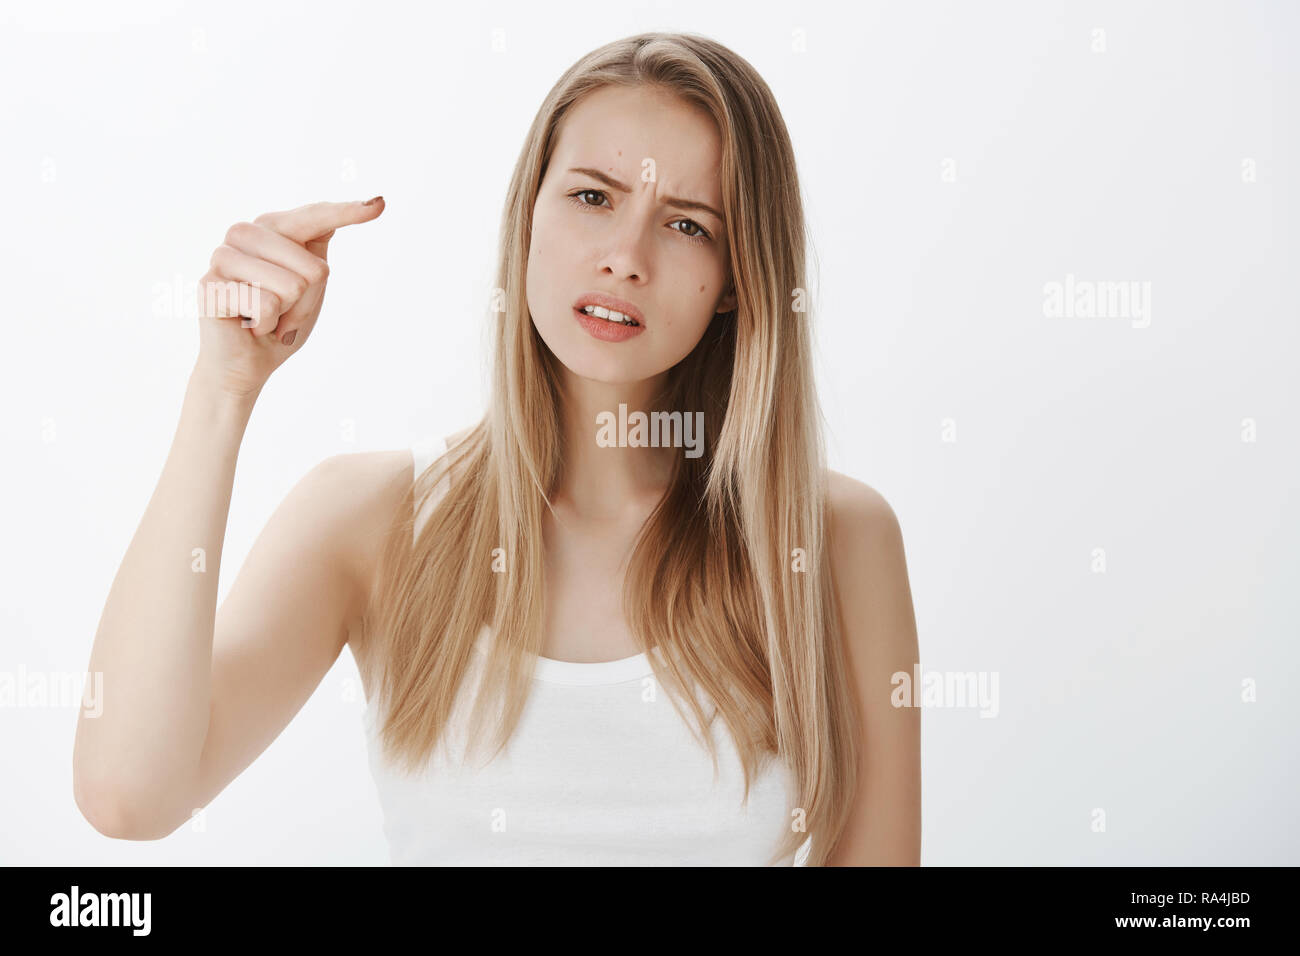 Girl blaming friend for hurting her feelings, being offended and hurt, pointing at camera as accusing someone frowning and squinting, sad as mate let her down standing gloomy over gray background Stock Photo